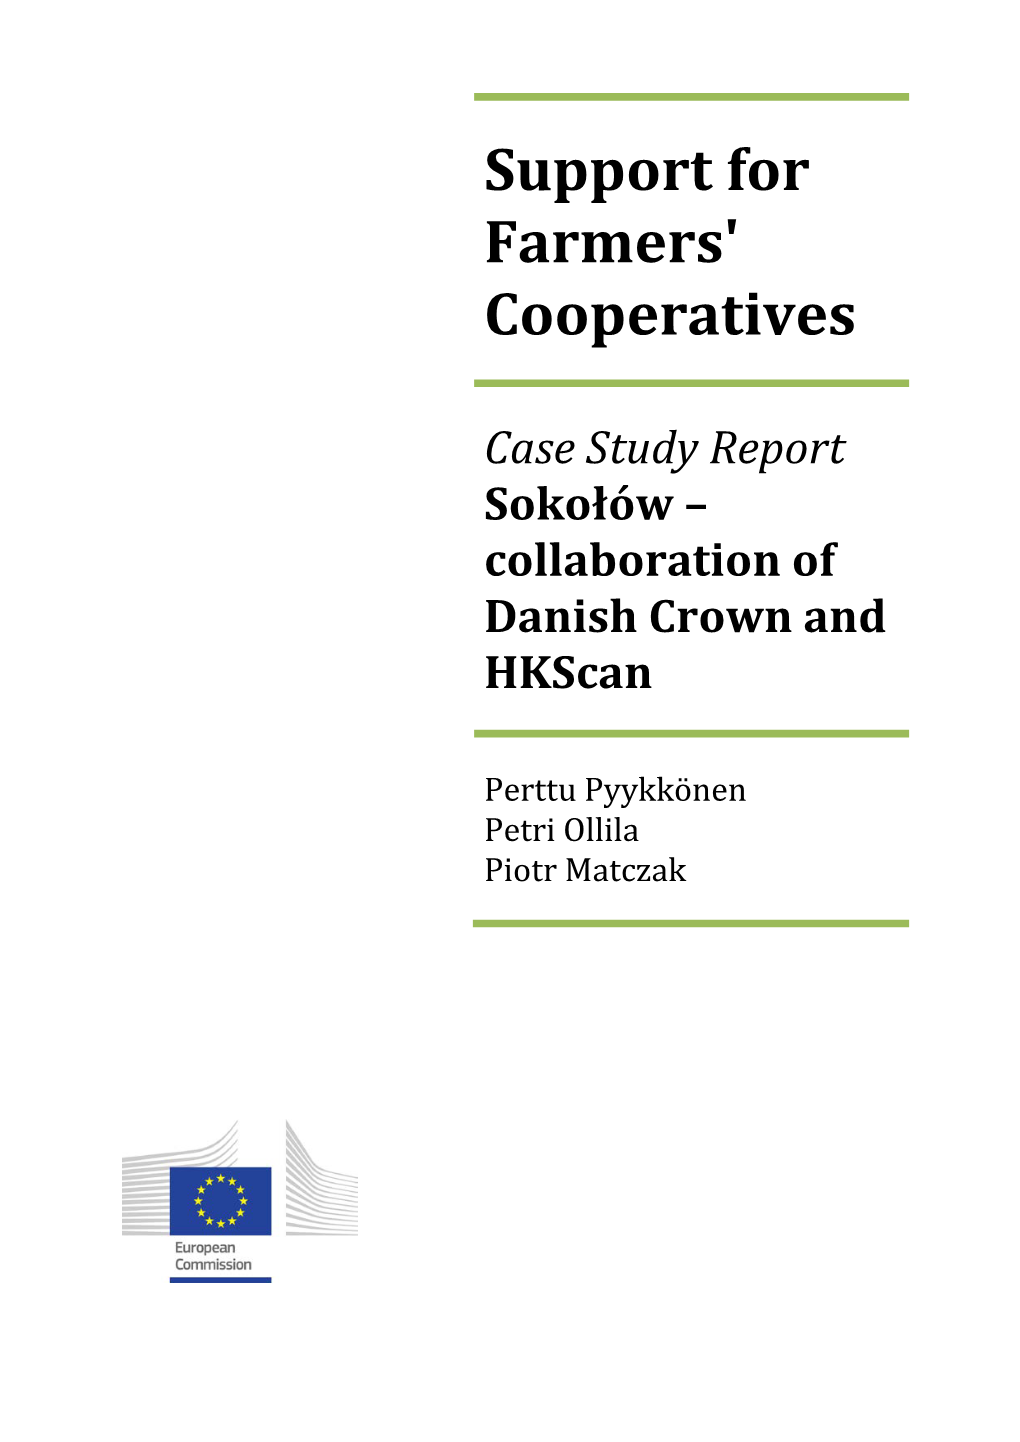 Support for Farmers' Cooperatives; Case Study Report Sokołów – Collaboration of Danish Crown and Hkscan